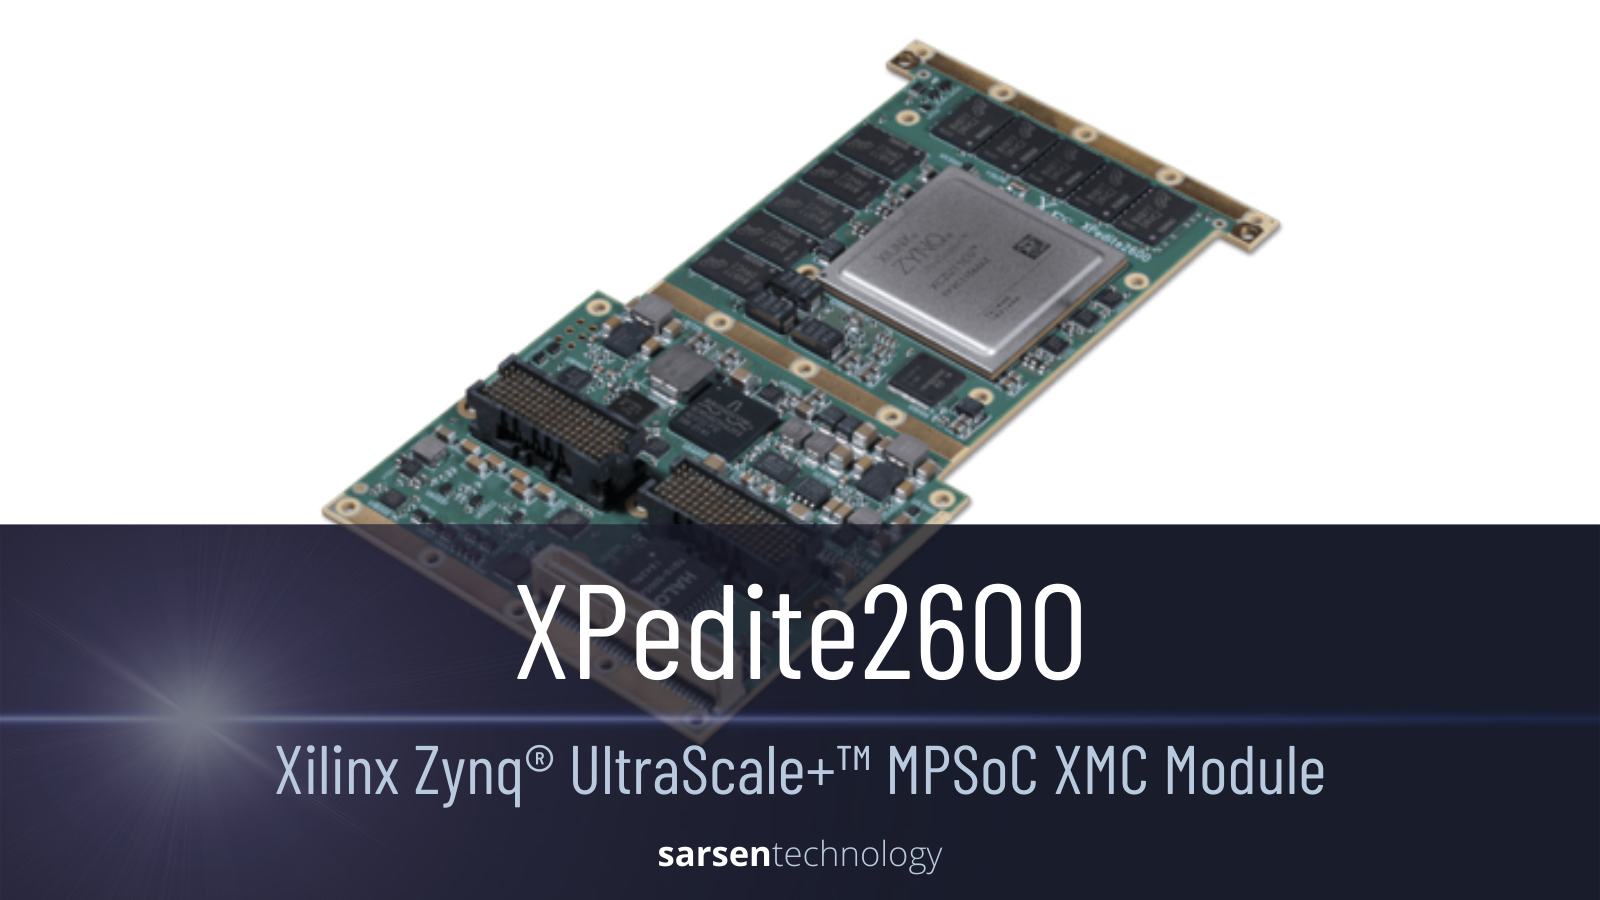 Xilinx Zynq® UltraScale+™ MPSoC-Based Conduction- or Air-Cooled XMC Module